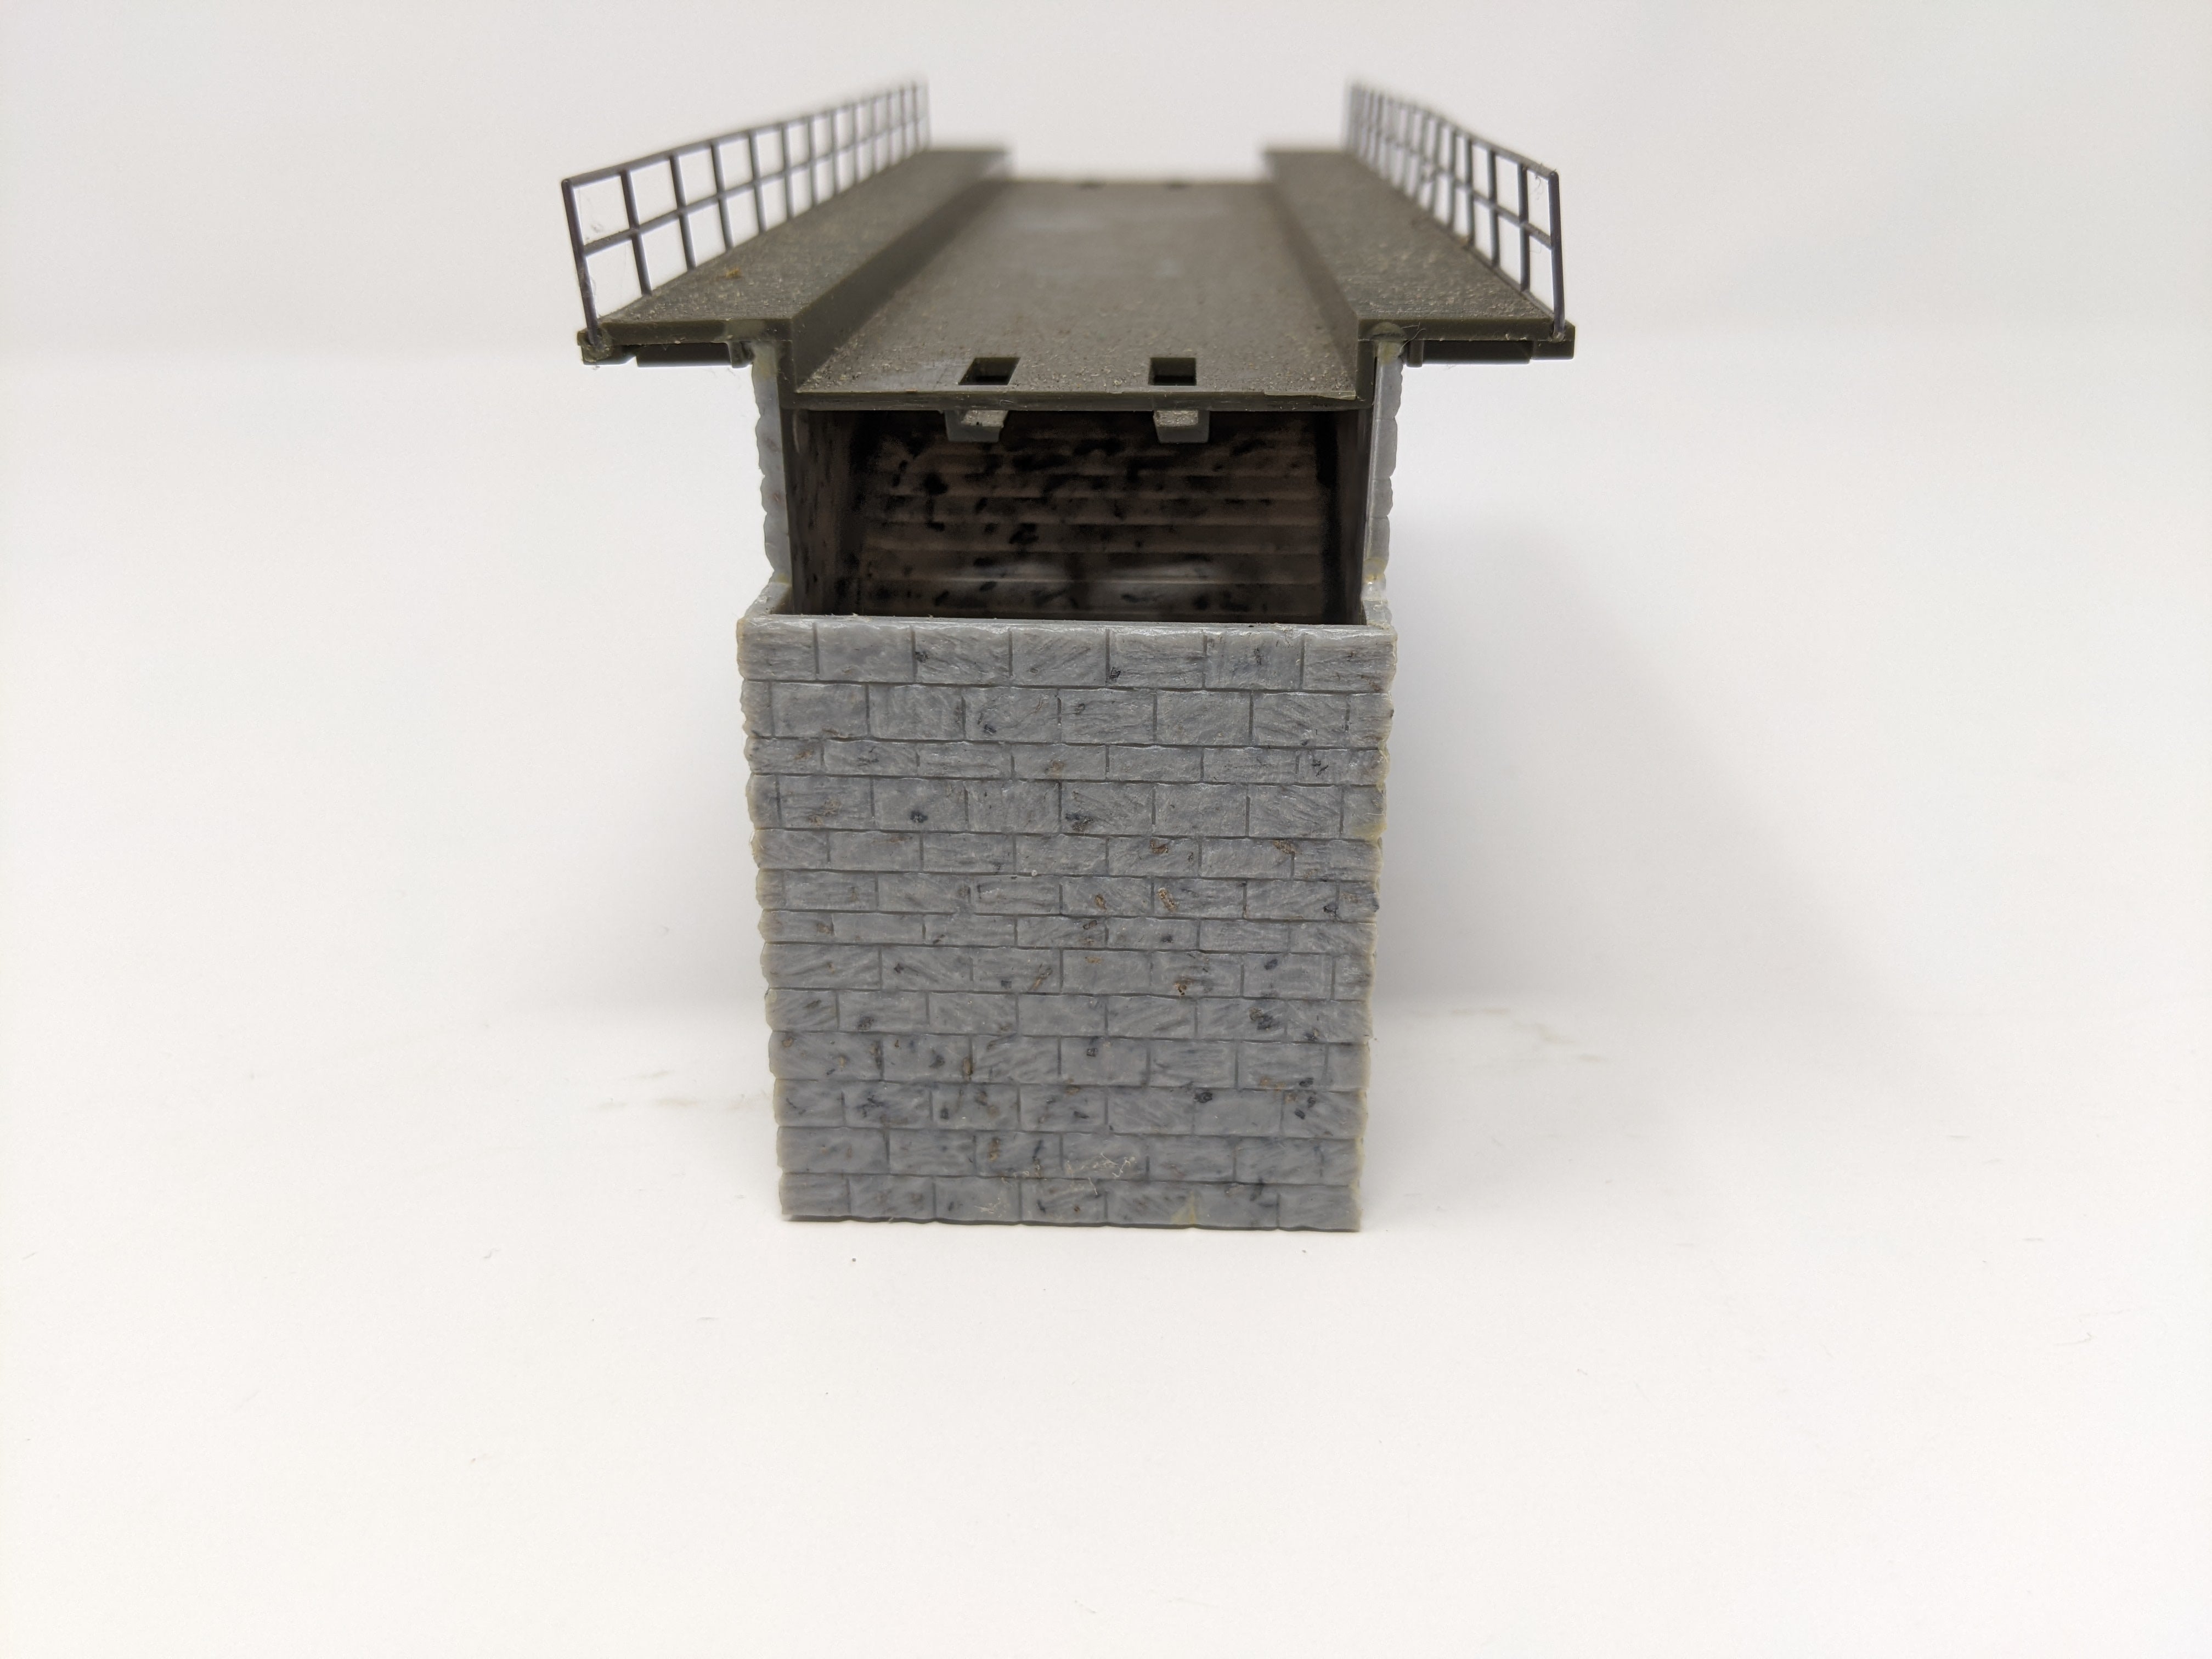 USED HO Scale, Cut Stone Viaduct Bridge Top Section - Straight